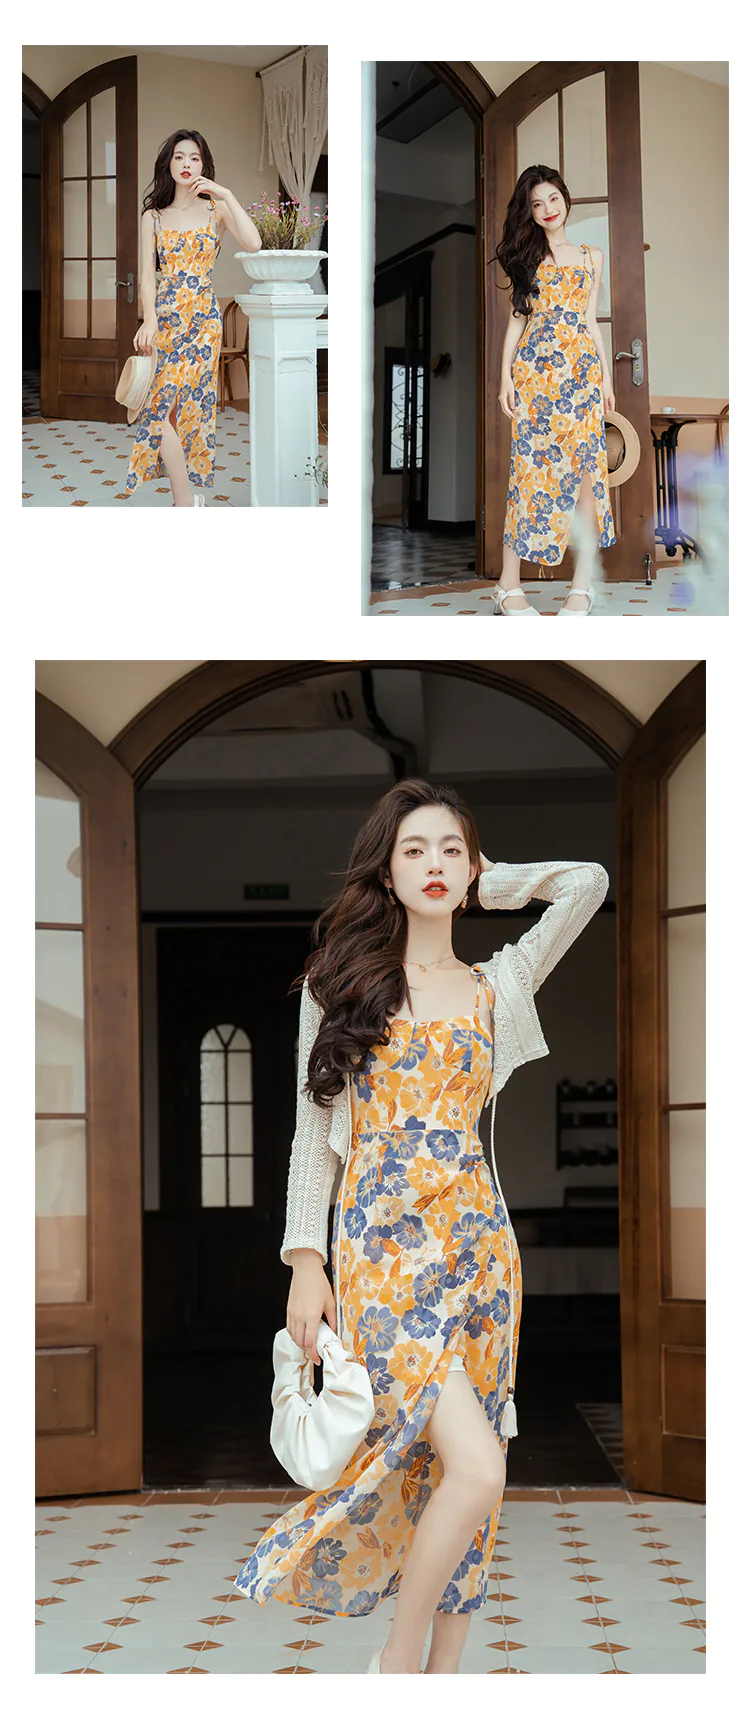 Sweet-Floral-Printed-Yellow-Summer-Beach-Slip-Dress-with-Knit-Cardigan13